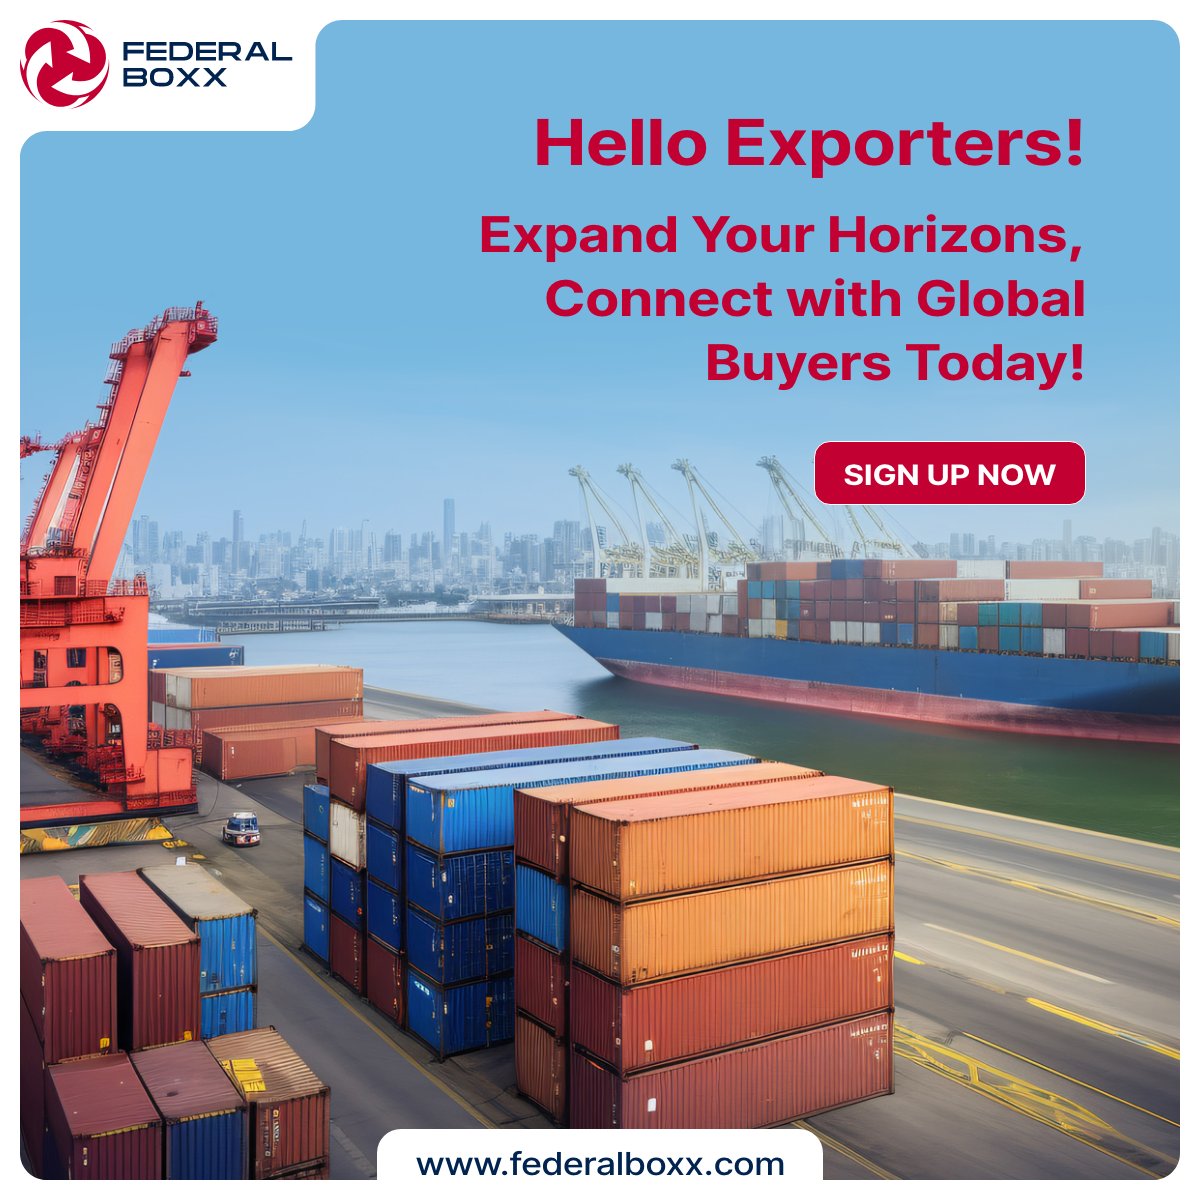 Hey Exporters!  Ready to expand your horizons? Connect with global buyers and take your business to new heights! Sign up with FederalBoxx today. Don't miss out, sign up now! #Exporters #GlobalBuyers #BusinessExpansion #Networking